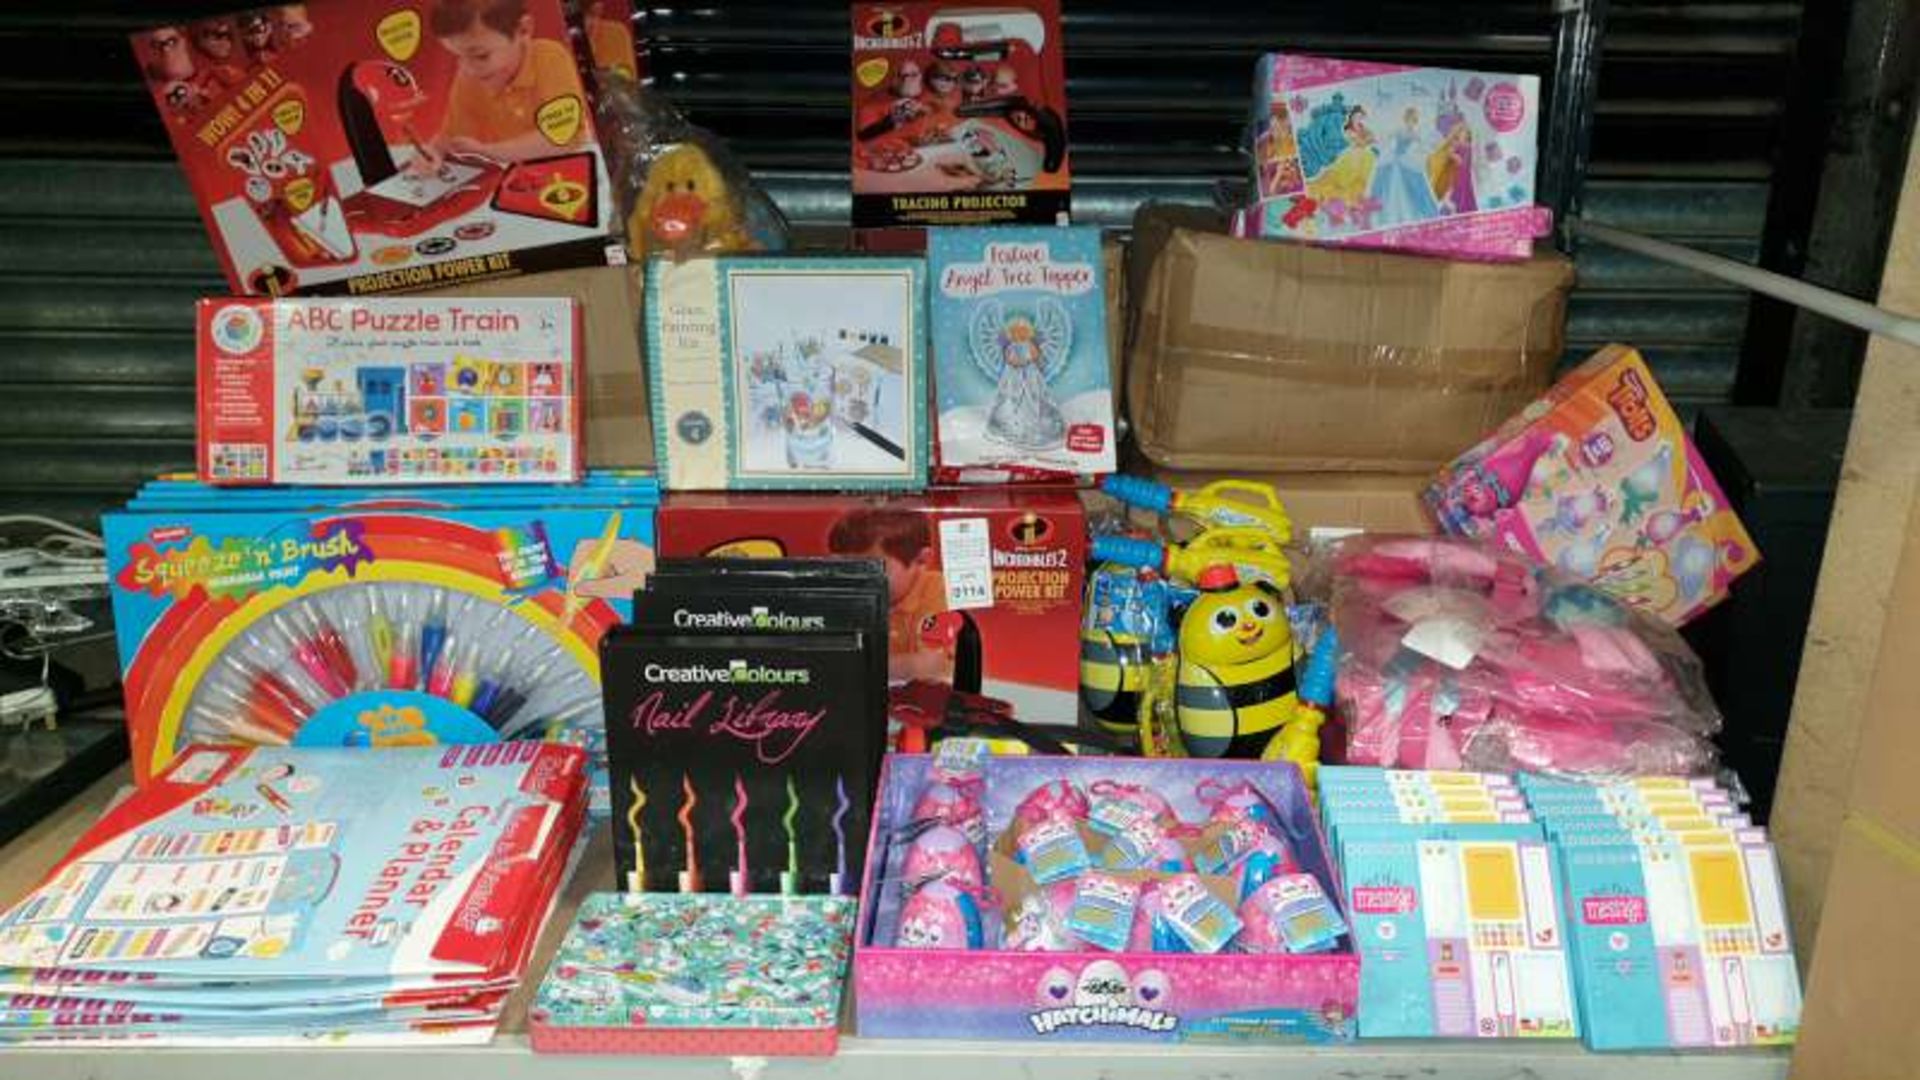 MIXED LOT CONTAINING NAIL LIBRARY, HATCHIMALS, SQUEEZE AND BRUSH PAINT SETS, GLASS PAINTING KITS,